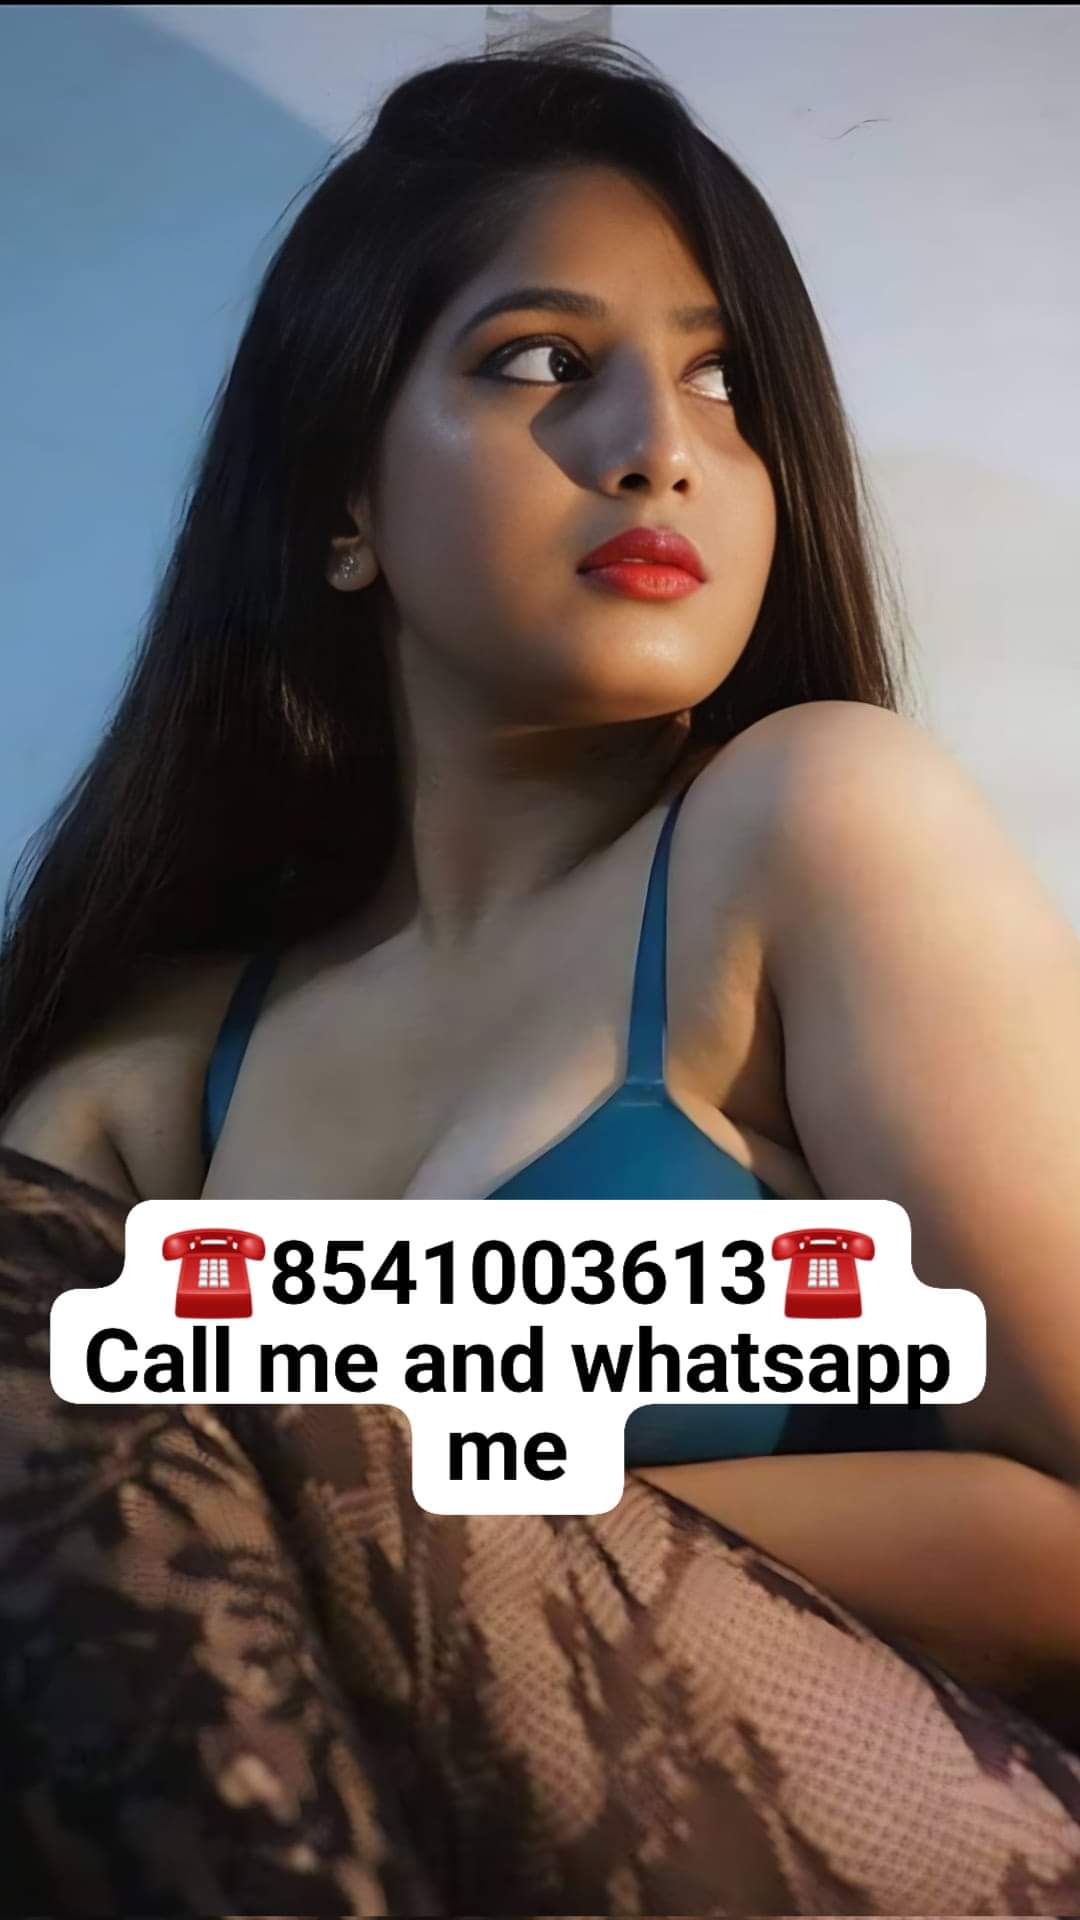 Ahmednagar call girls available hot and sexy college girls